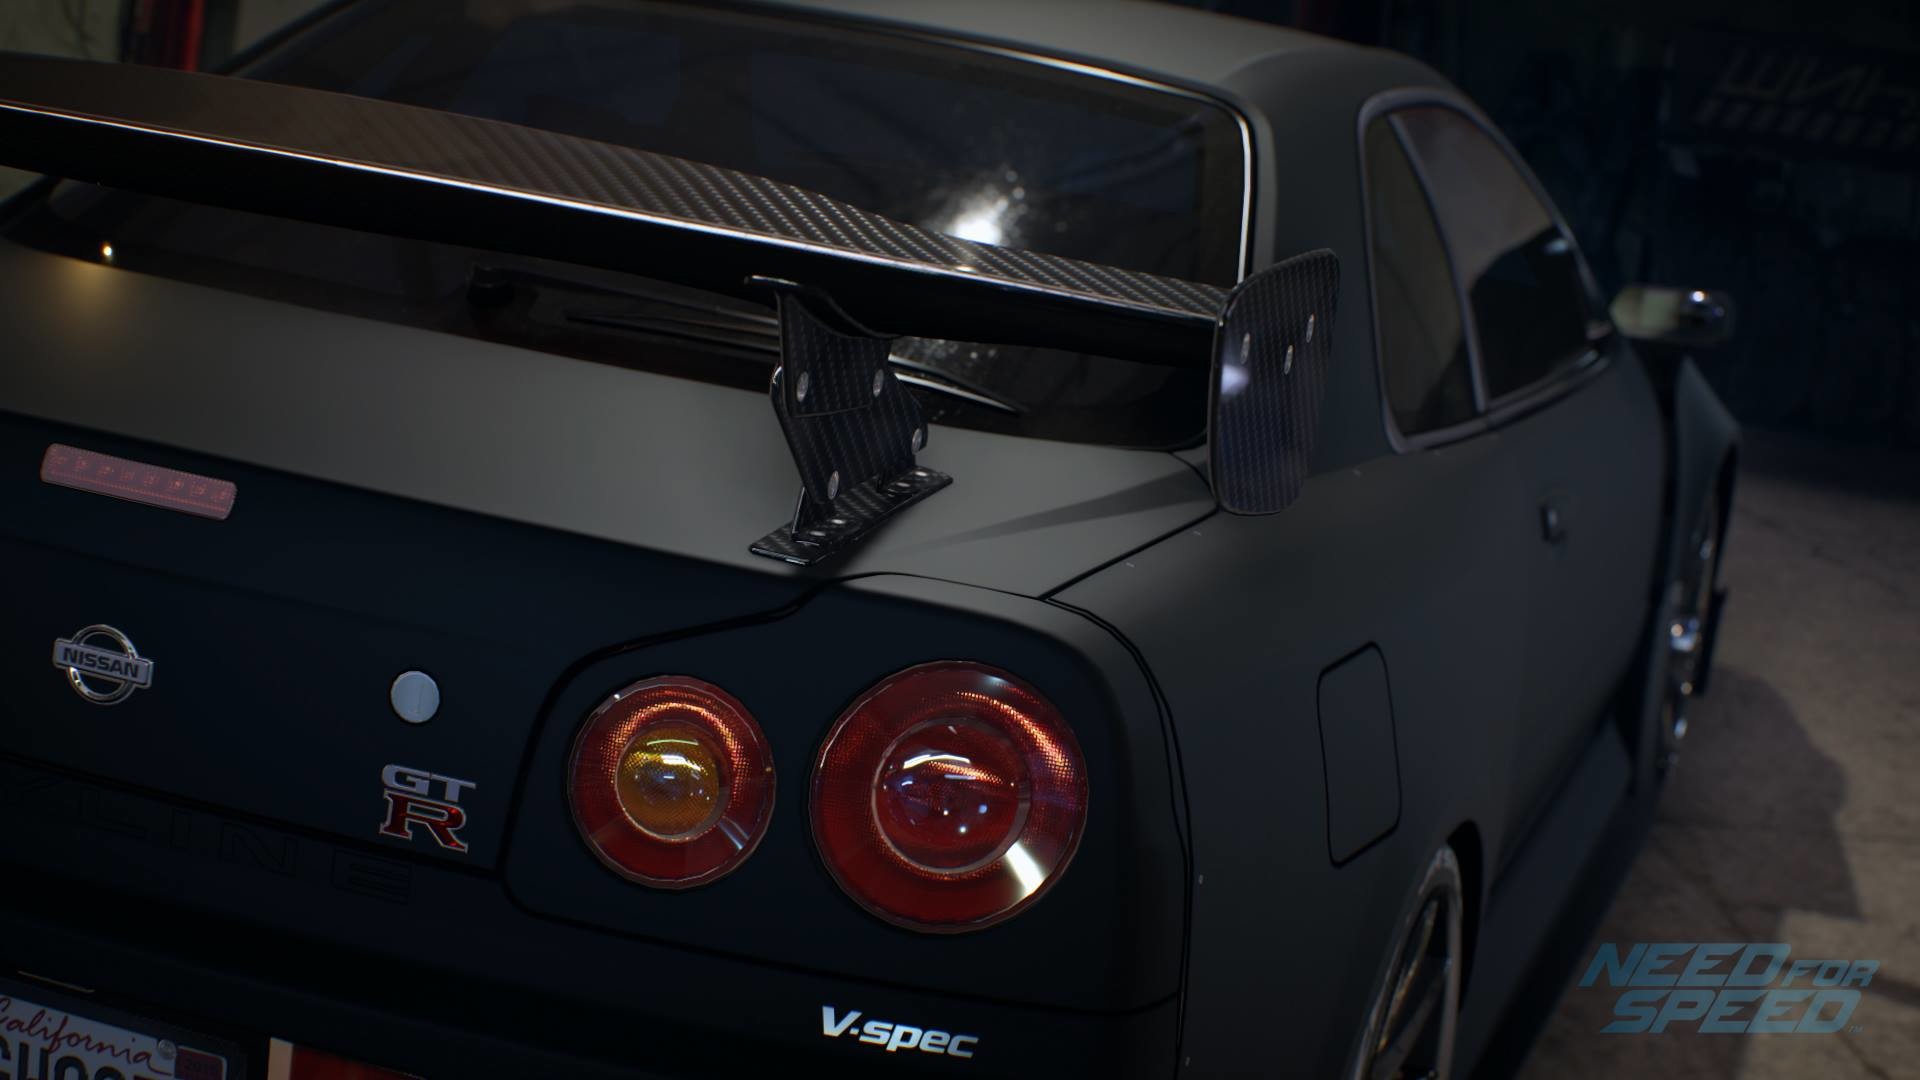 1920x1080 Video Game - Need for Speed (2015) Nissan Wallpaper